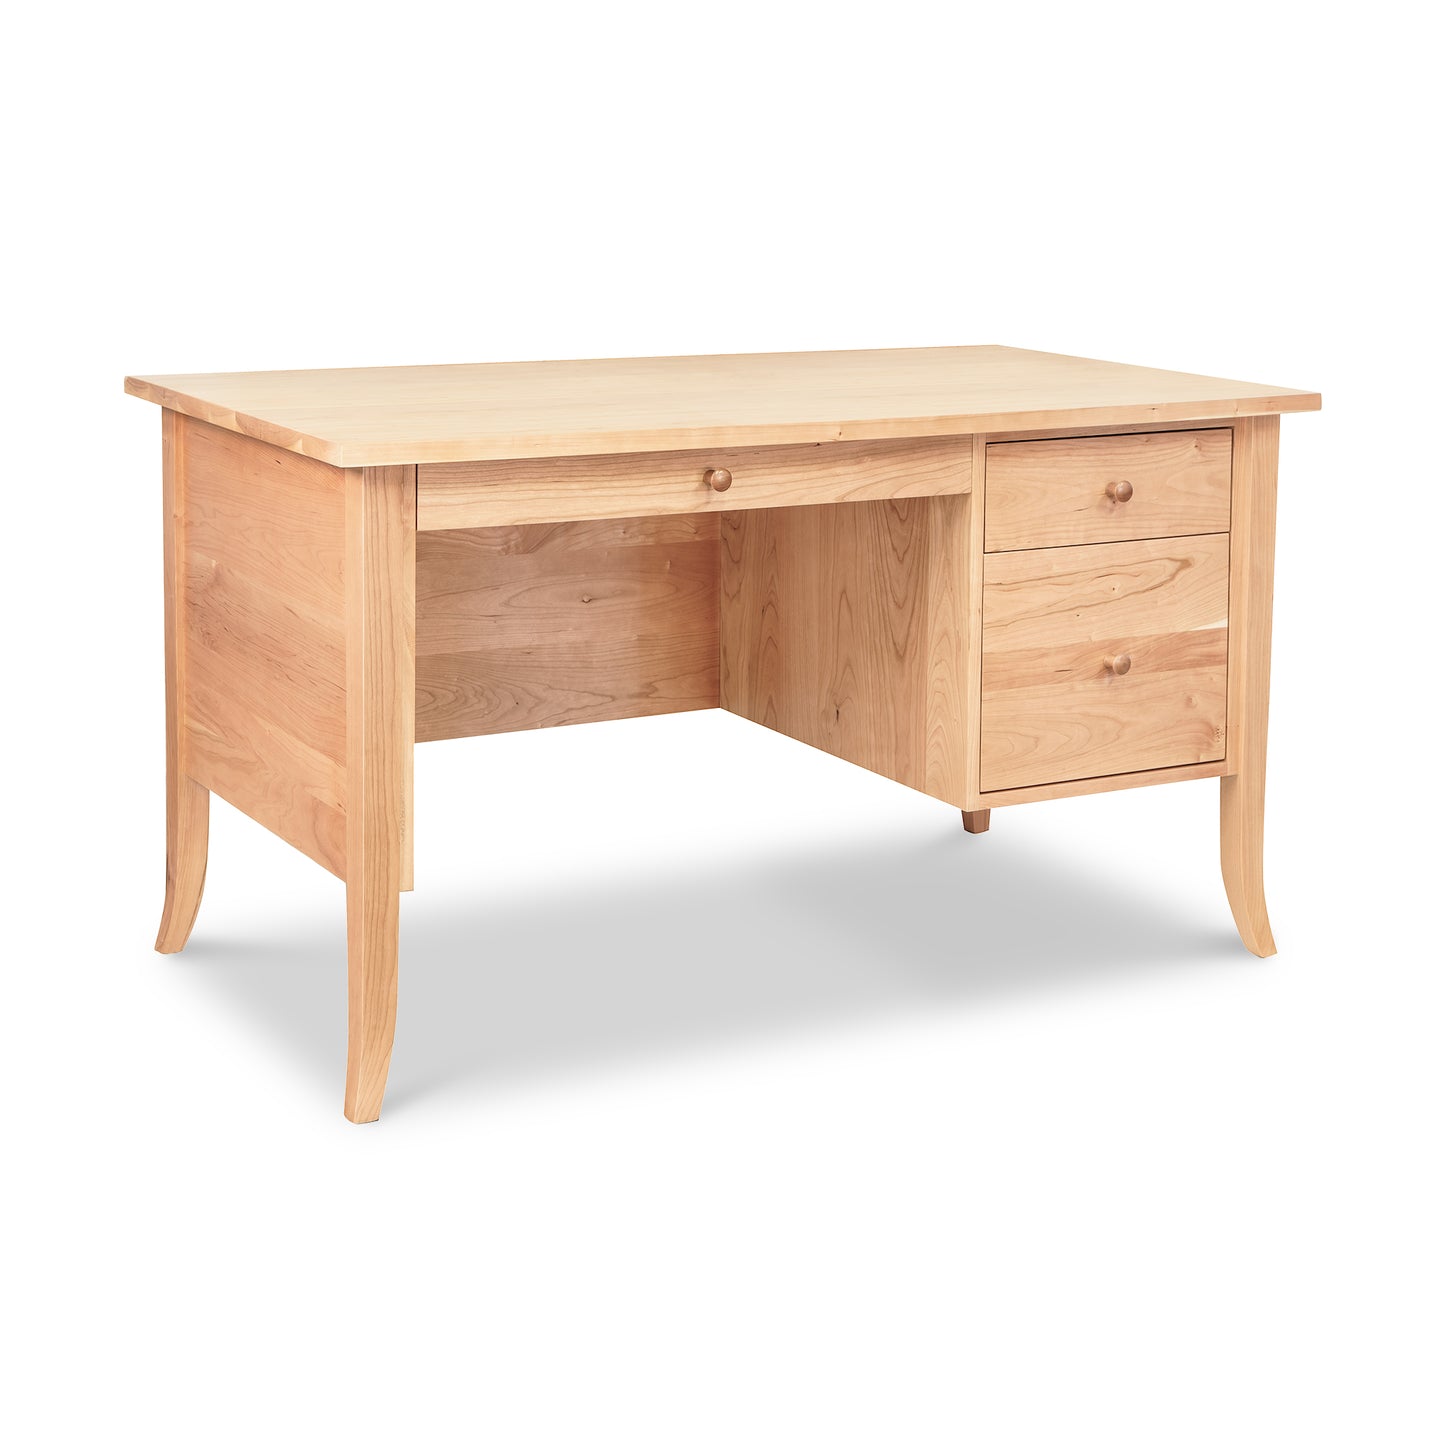 A Small Wood Flare Leg Executive Desk with drawers and a solid wood construction from Lyndon Furniture.